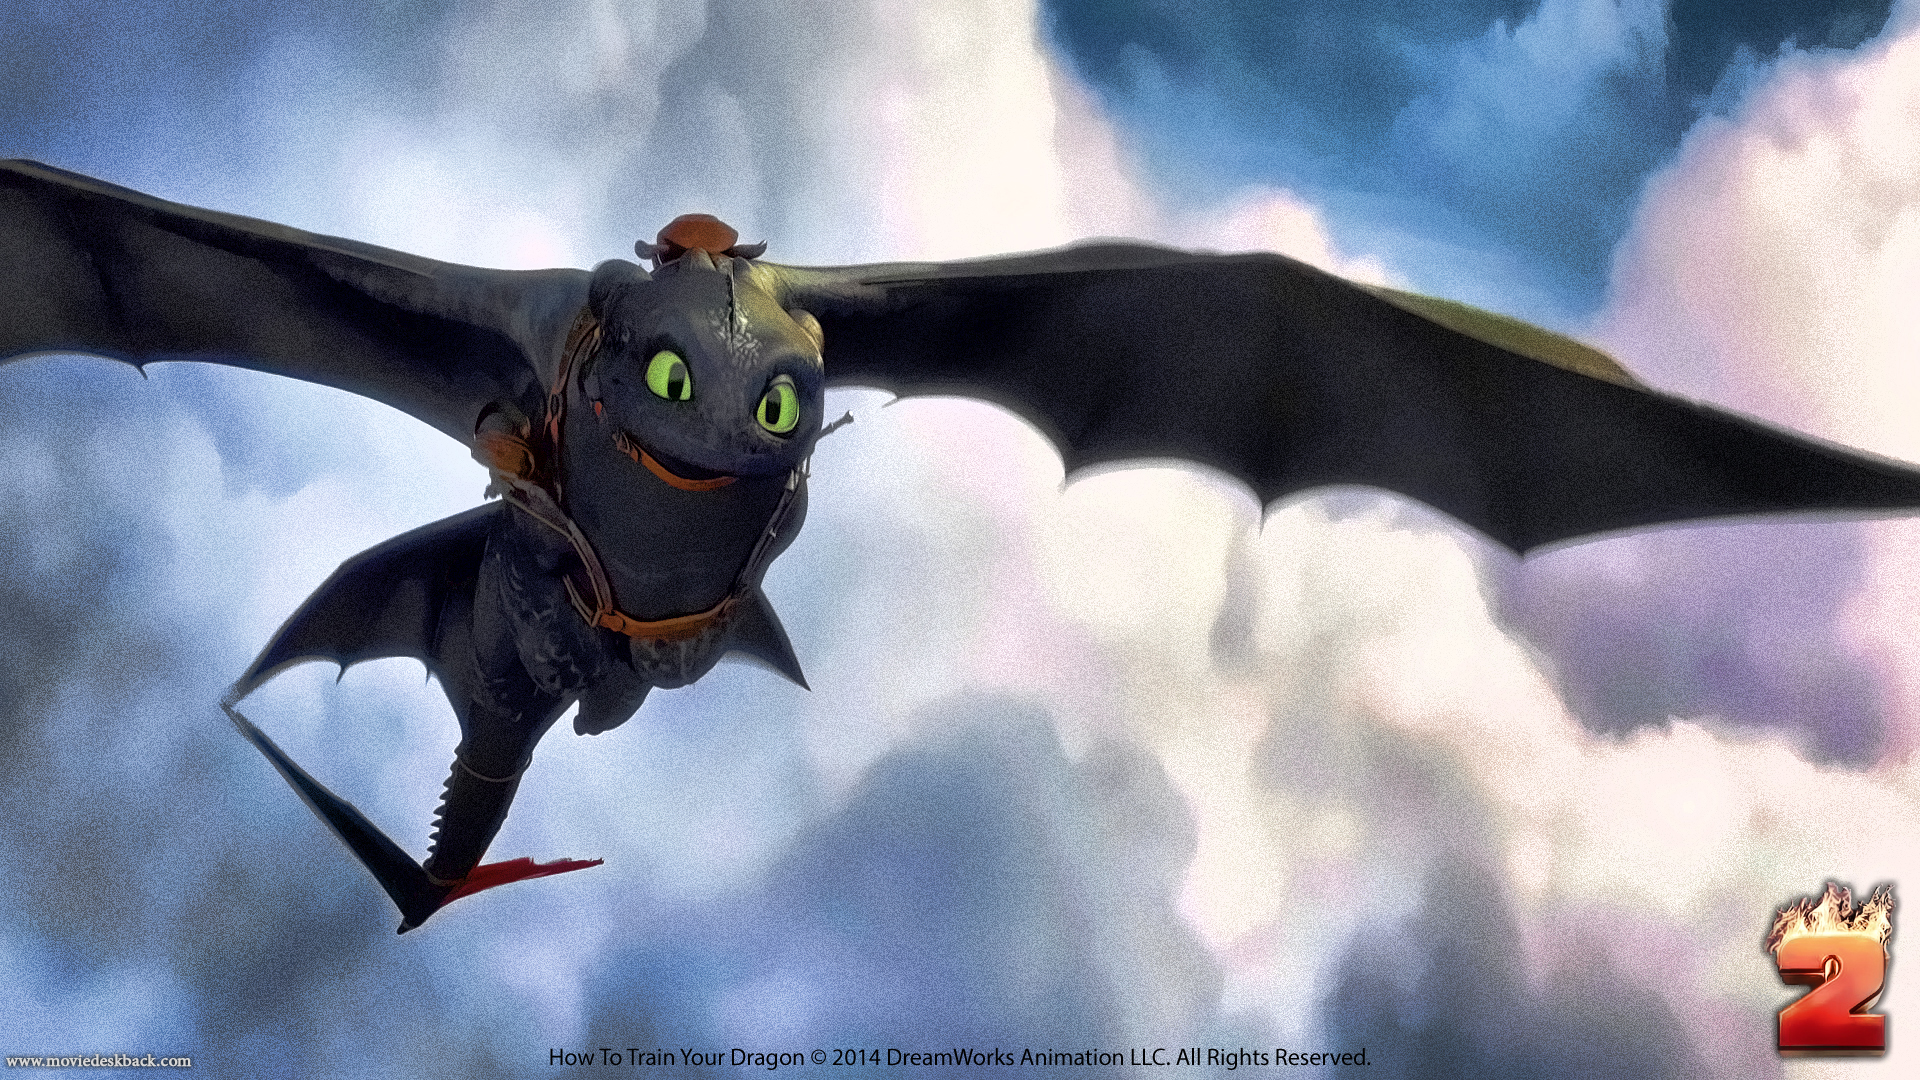 How To Train Your Dragon 2 Toothless Flying - wallpaper.